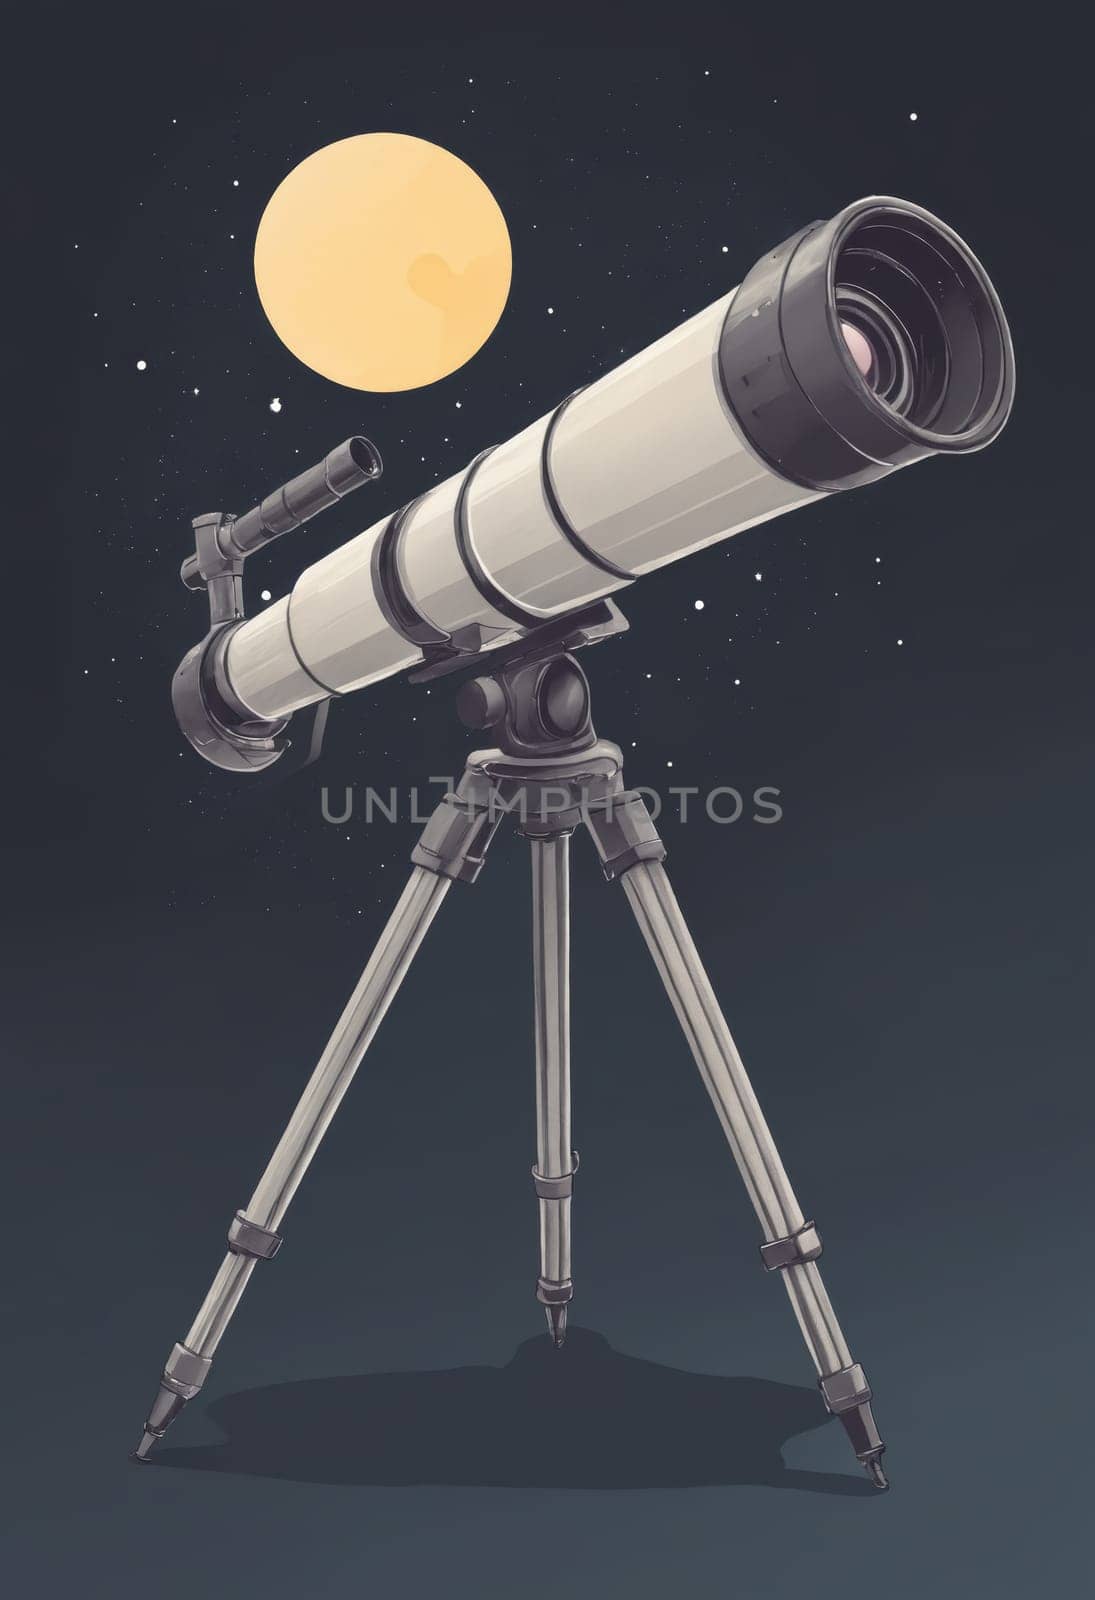 Celestial Gazing: Artistic Telescope Poised for Starry Discovery by Andre1ns